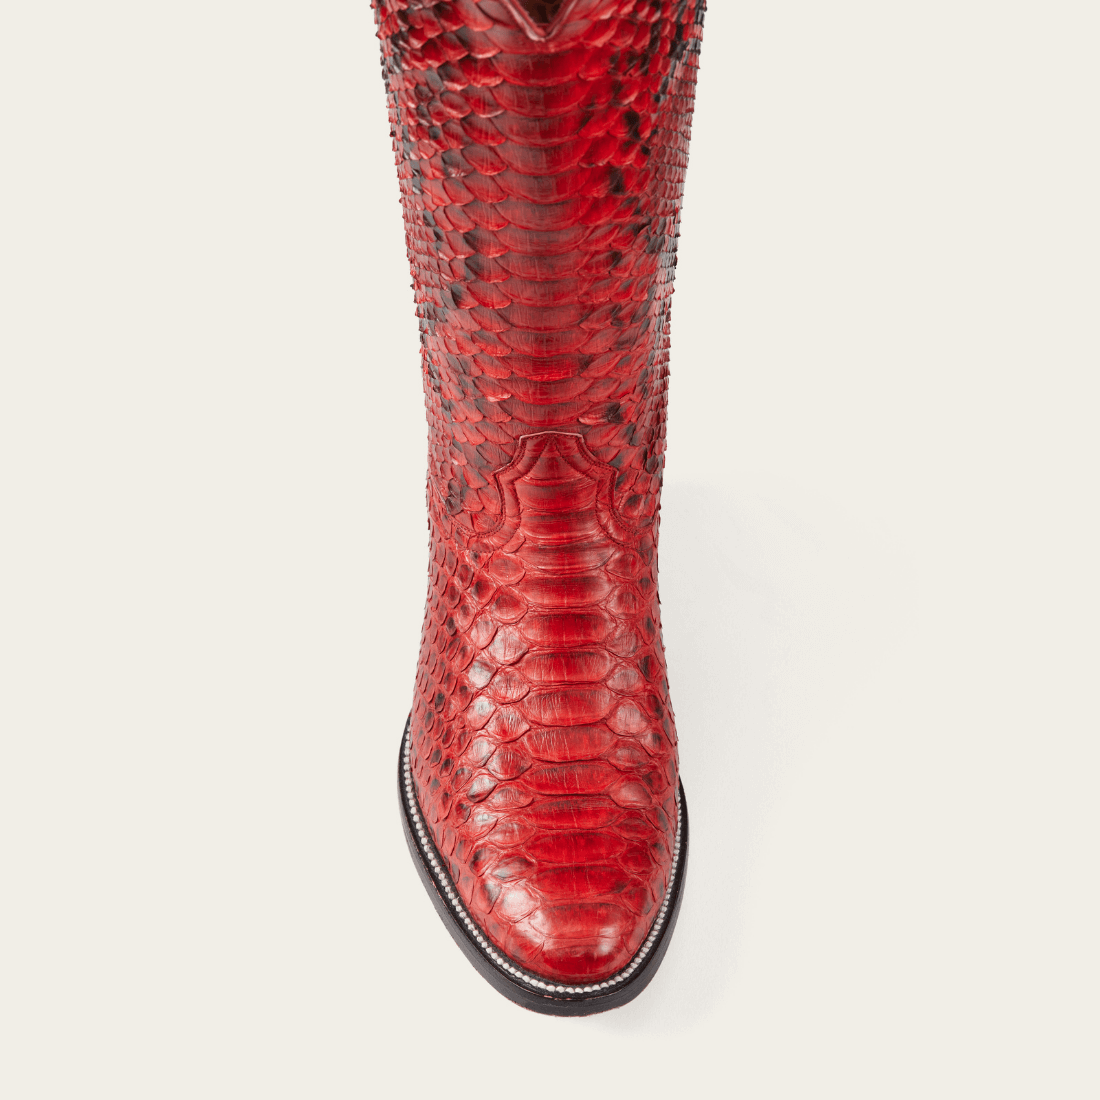 CITY Boots Midland Women's Red Python Cowboy Boots - CITY Boots